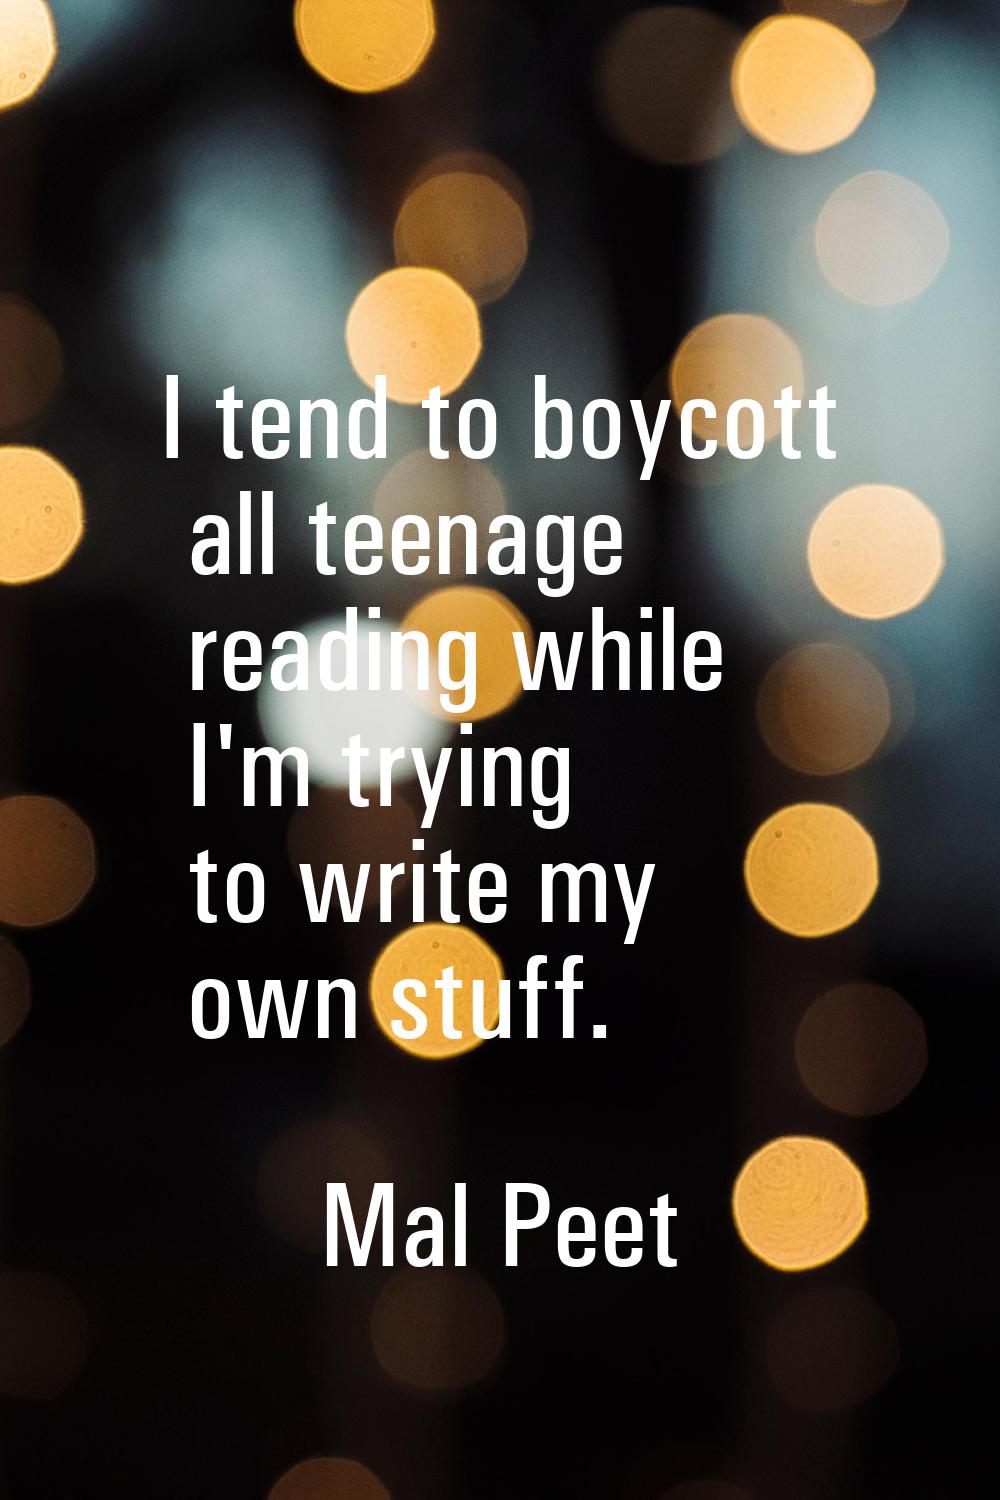 I tend to boycott all teenage reading while I'm trying to write my own stuff.